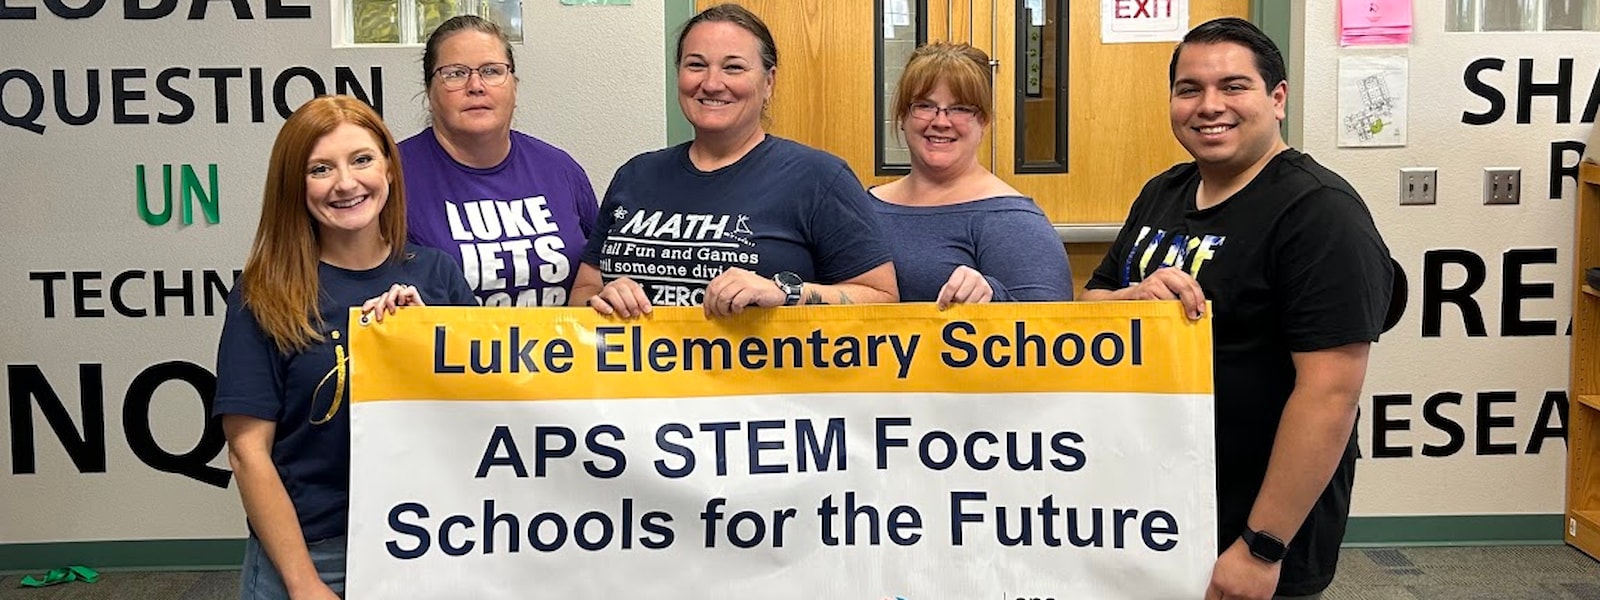 Luke Staff with APS STEM FOCUS SCHOOLS for the Future Banner